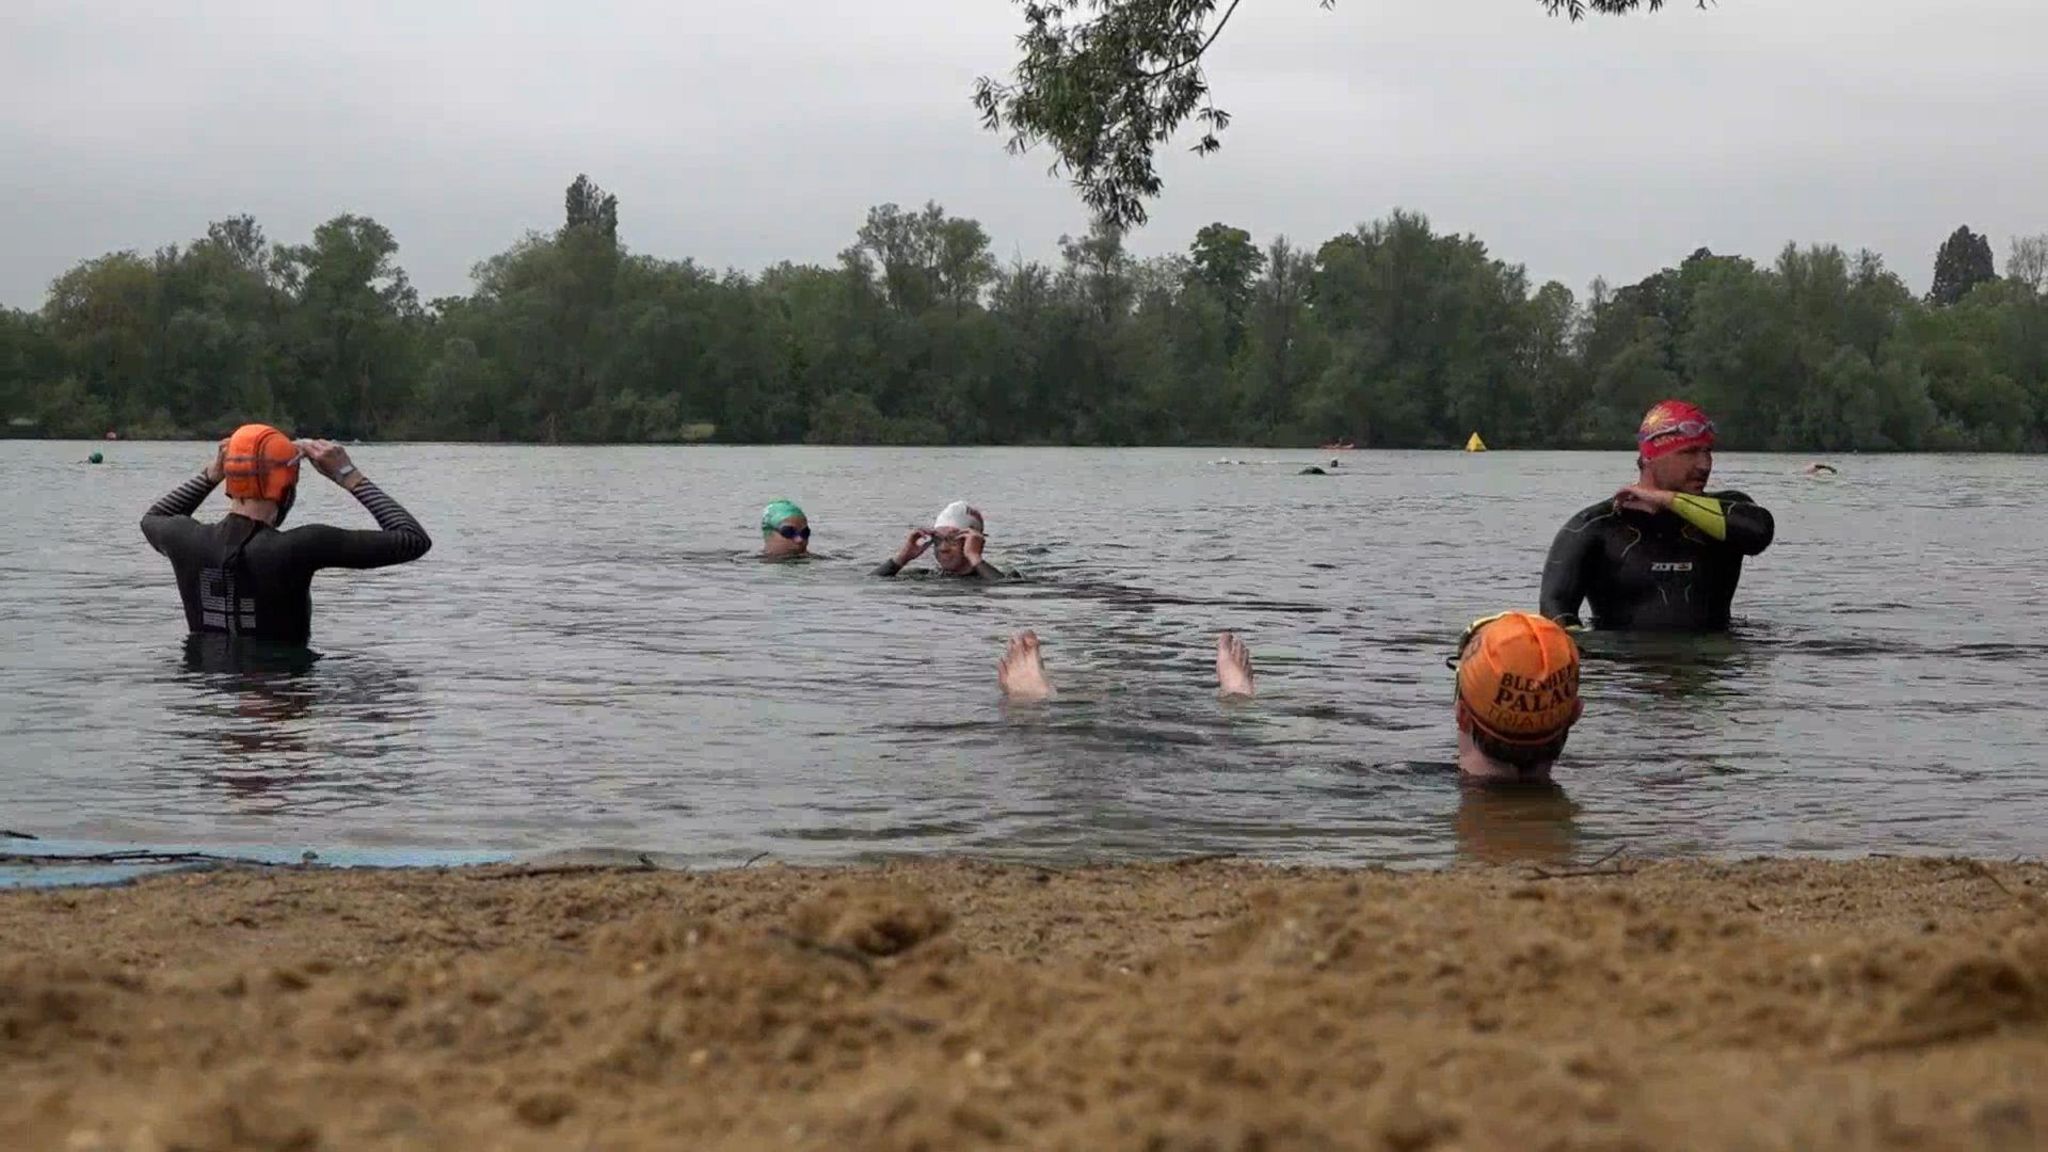 Protesters gathered for a swim at Ferris Meadow Lake in Surrey